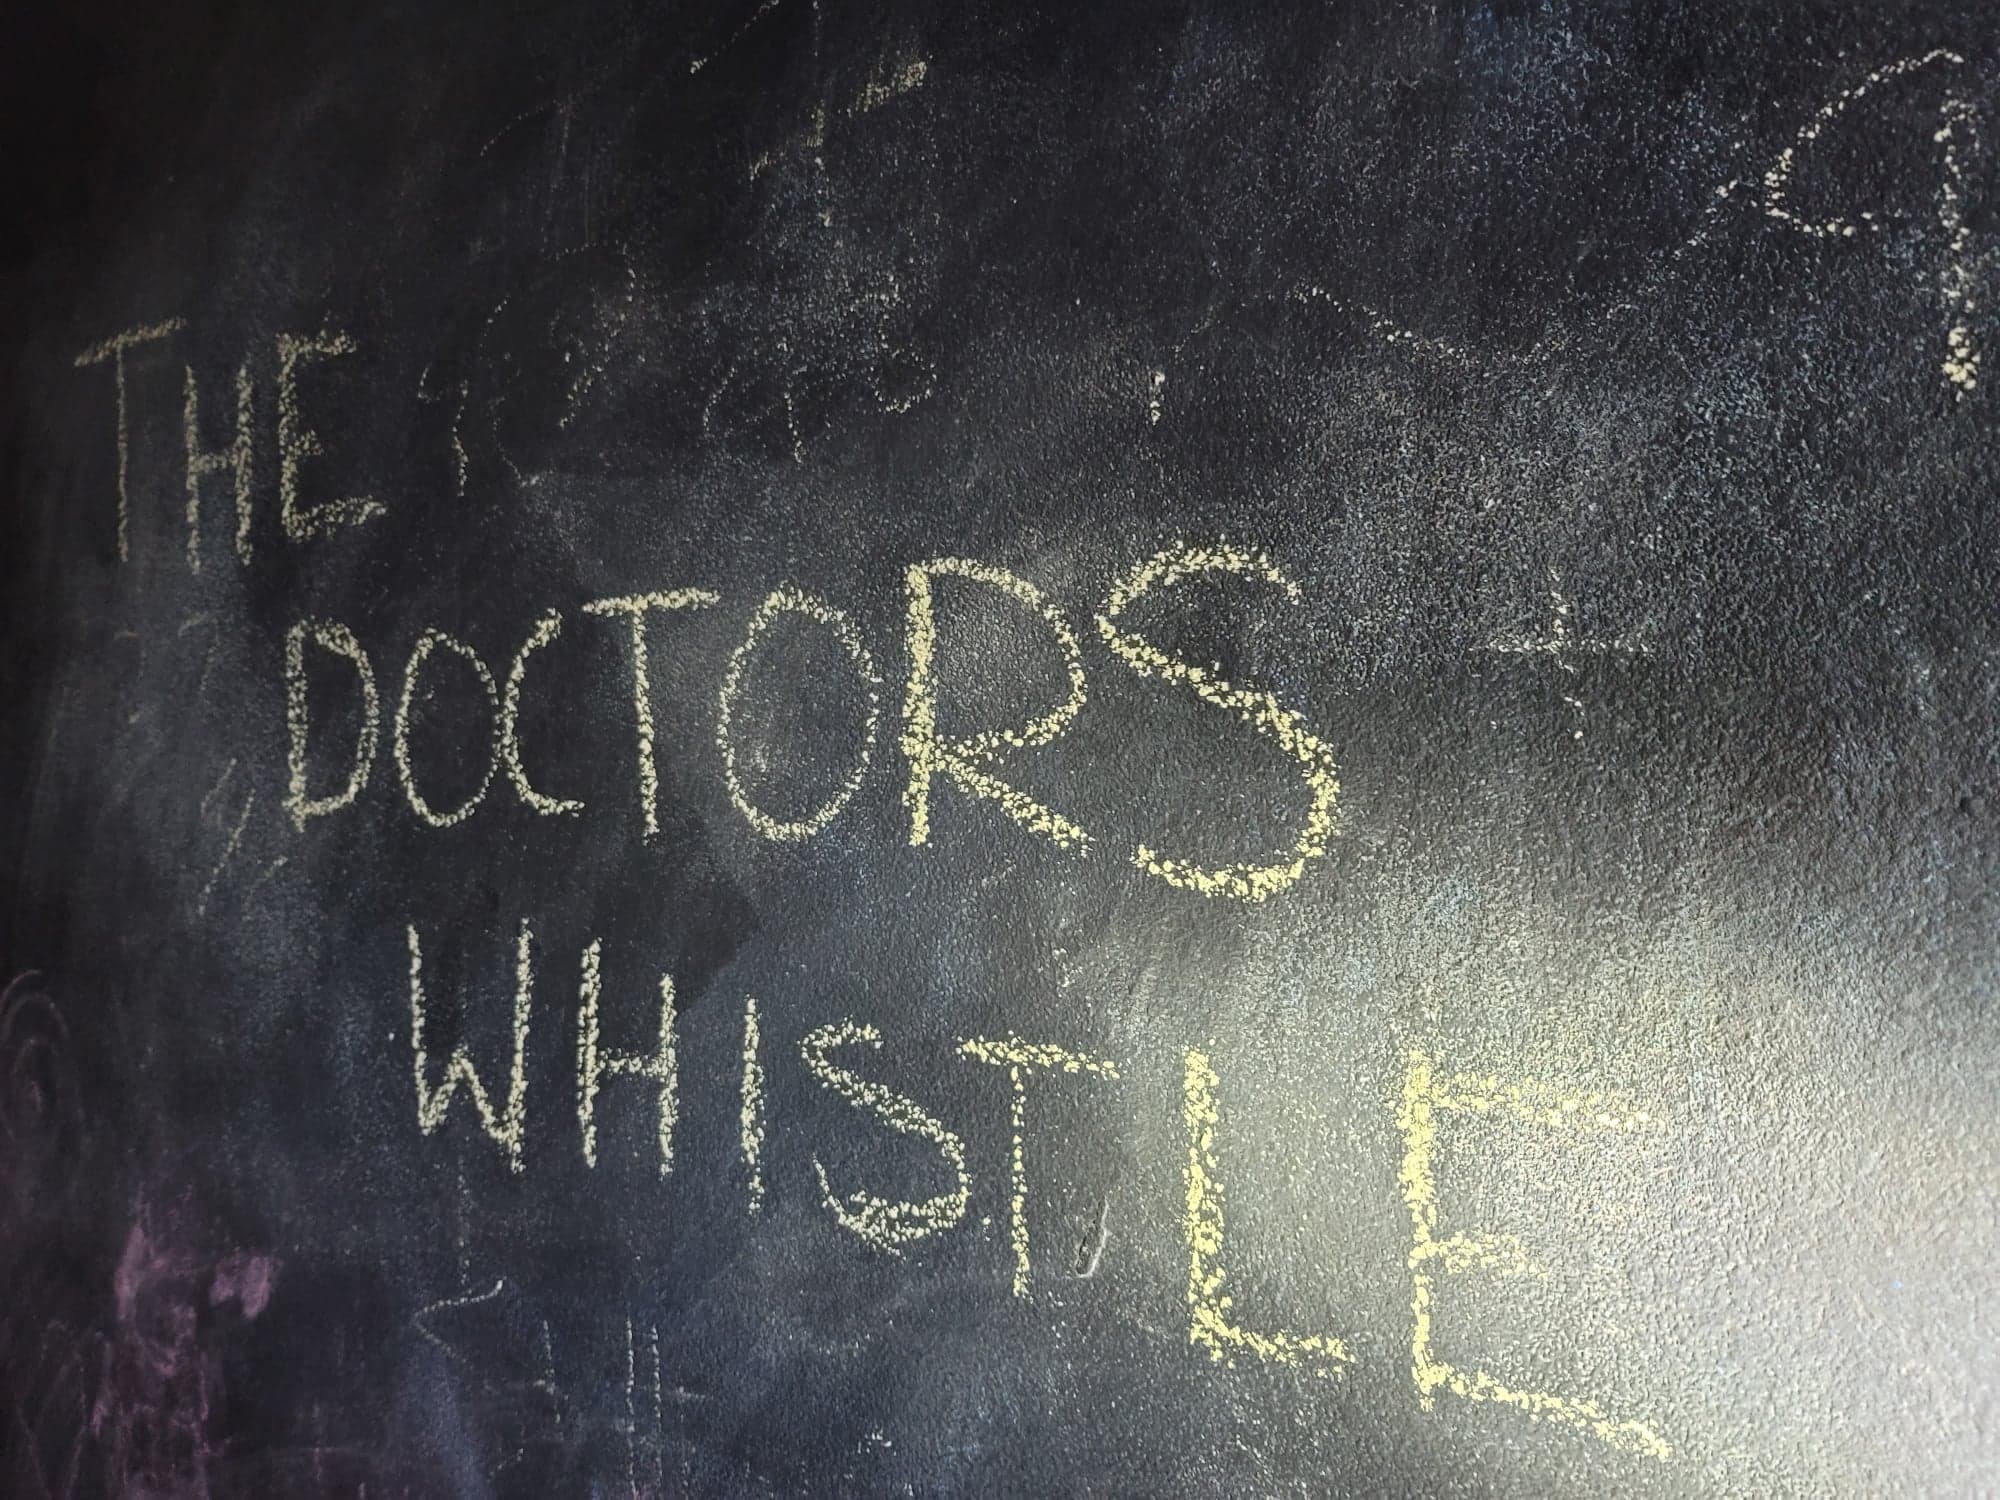 The Doctors Whistle